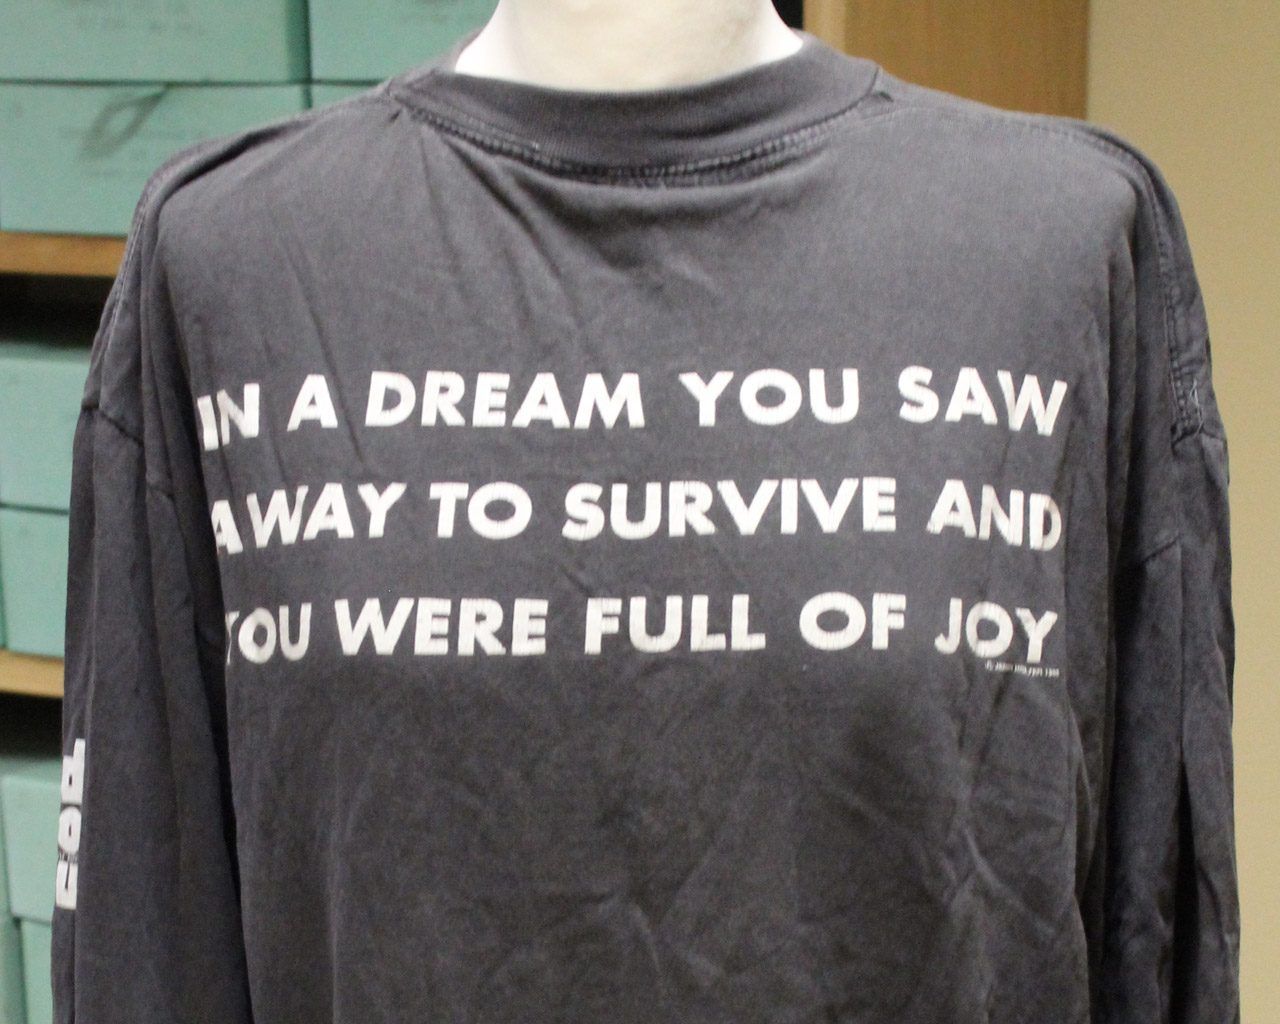 T-shirt for the Red Hot Organization, Jenny Holzer, 1990